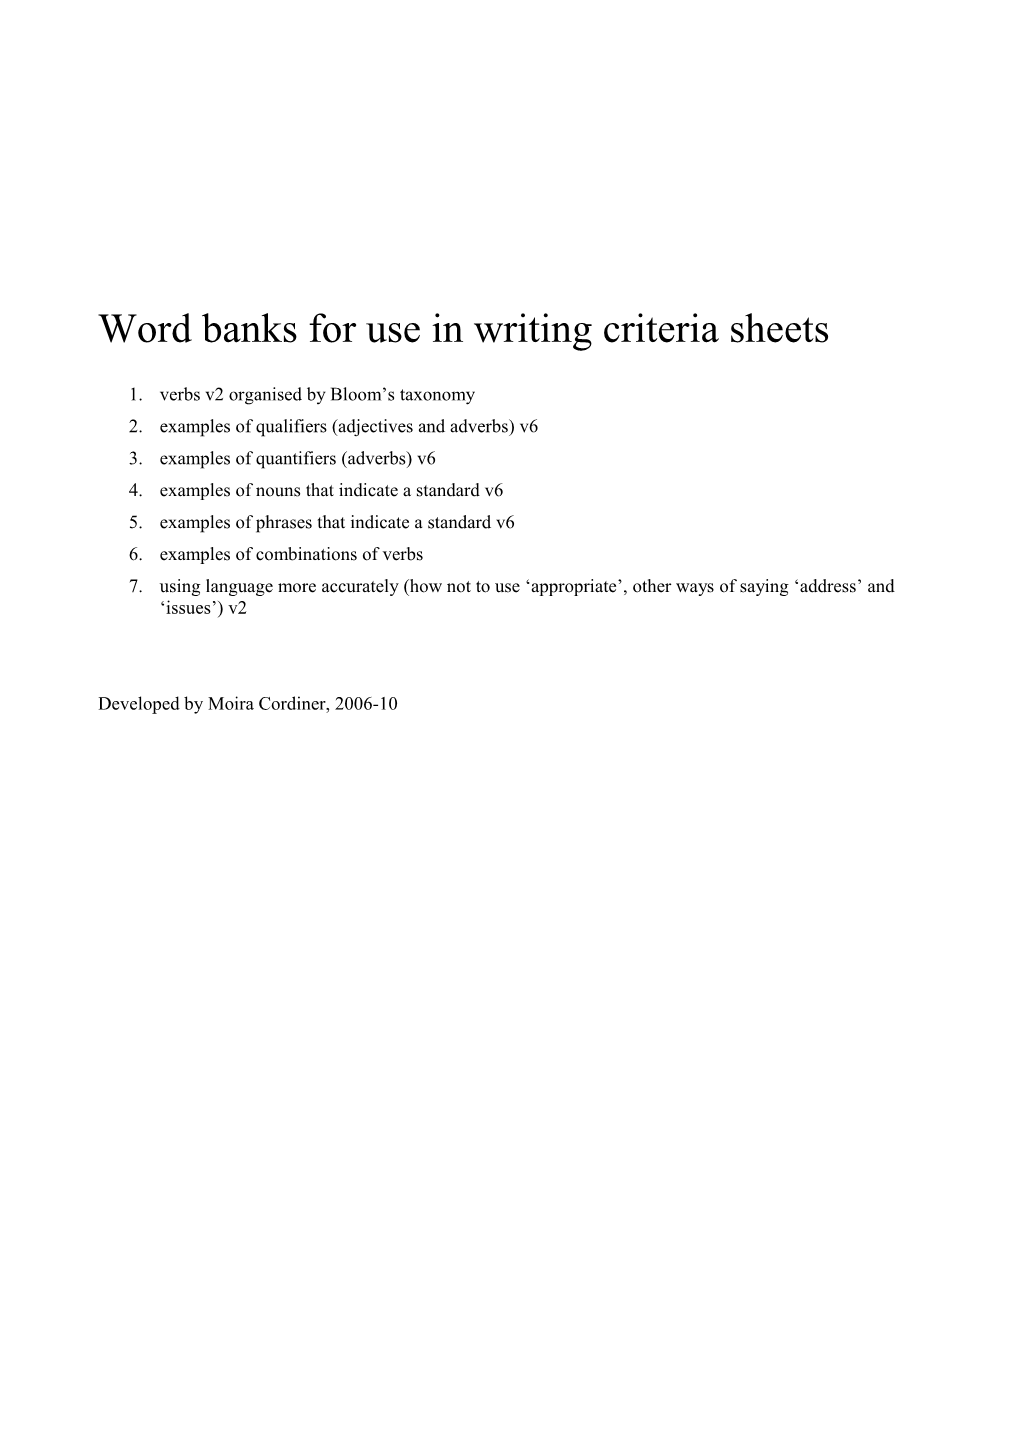 Word Banks for Use in Writing Criteria Sheets